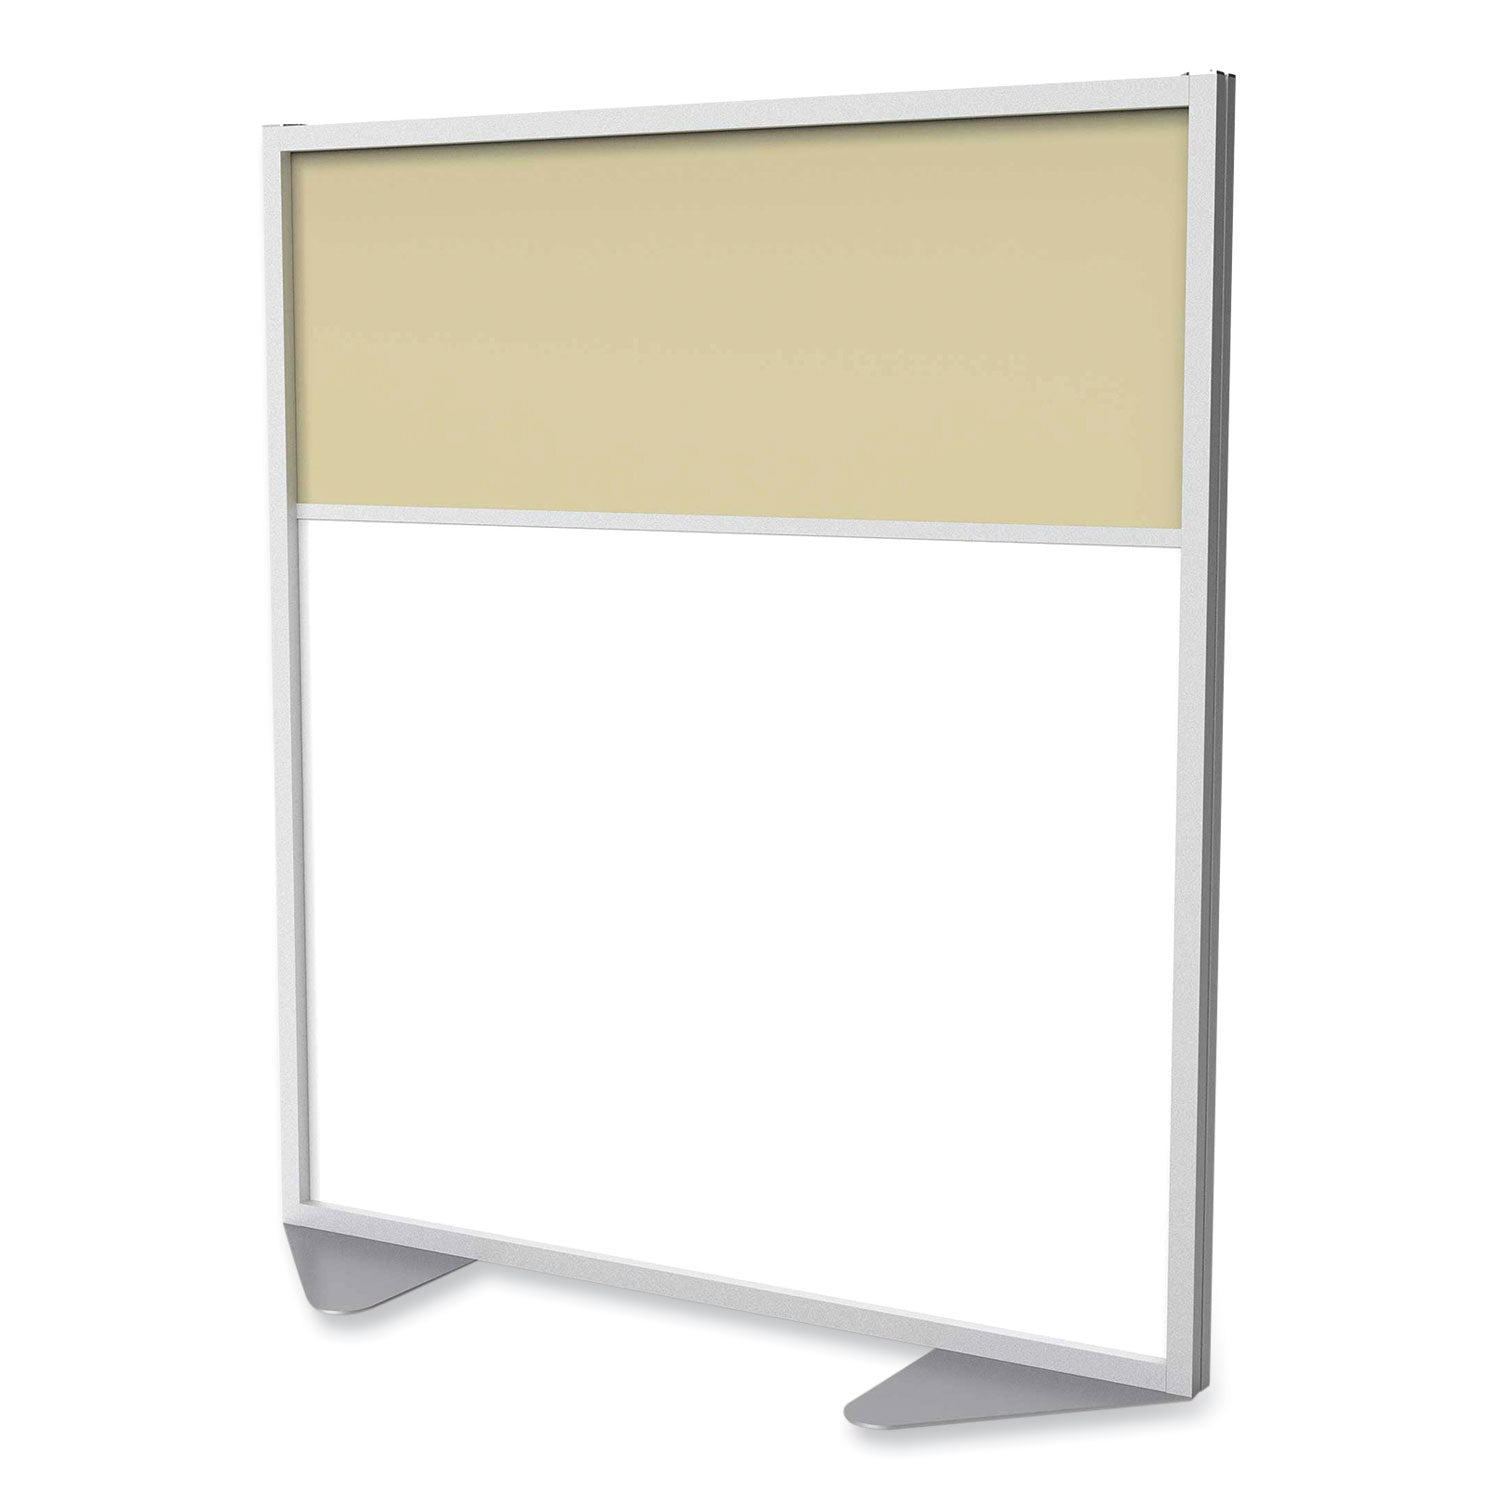 floor-partition-with-aluminum-frame-and-2-split-panel-infill-4806-x-204-x-5386-white-carmel-ships-in-7-10-business-days_ghemp5448208a - 1